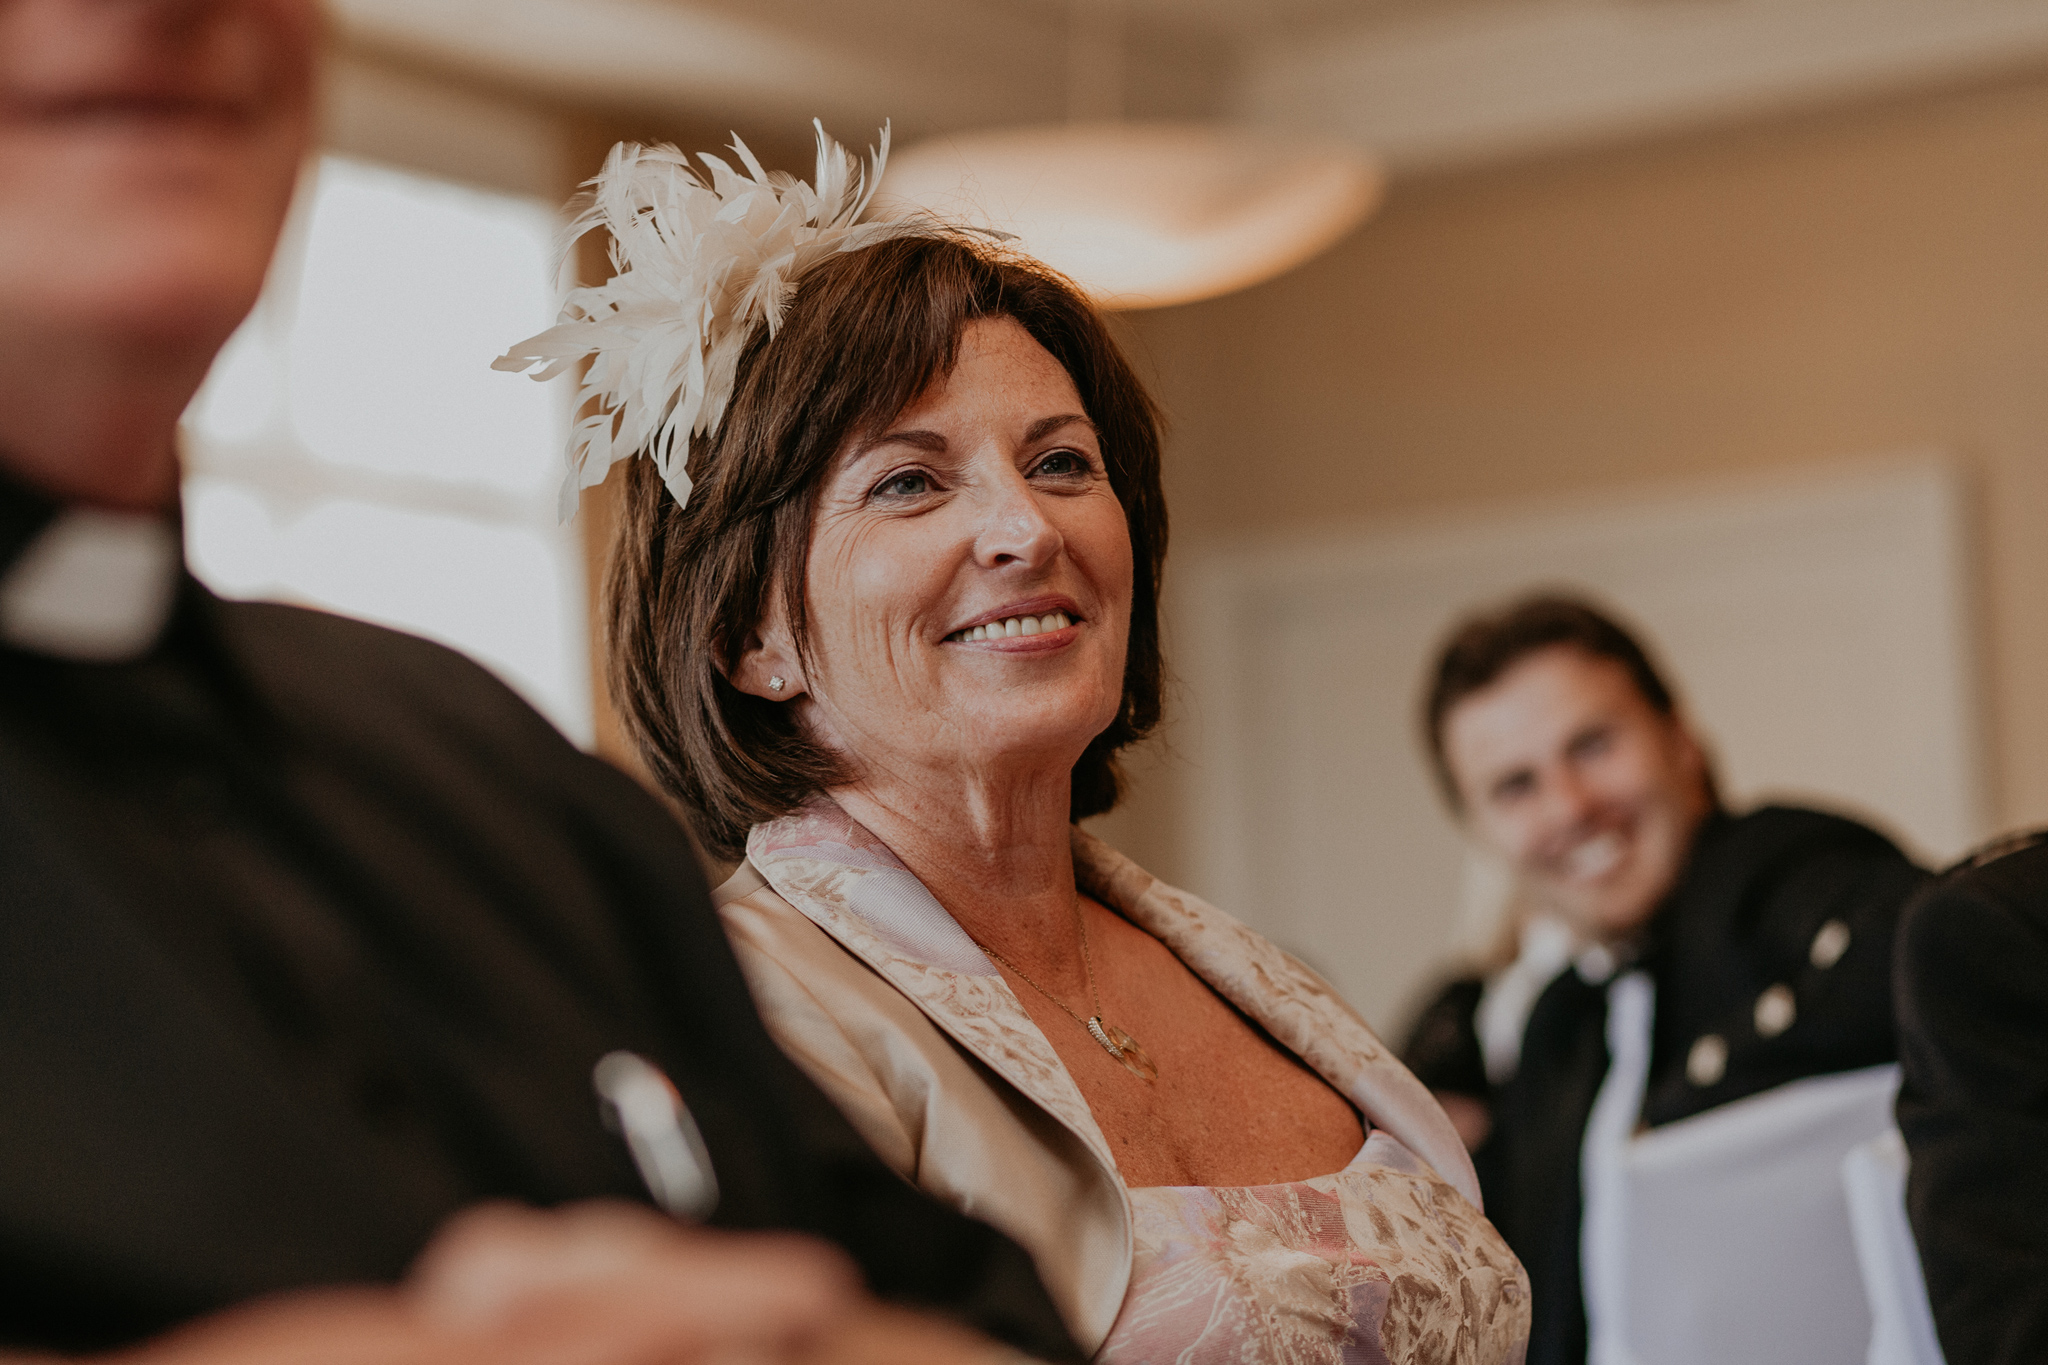 Mother of groom smiles during speeches at reception